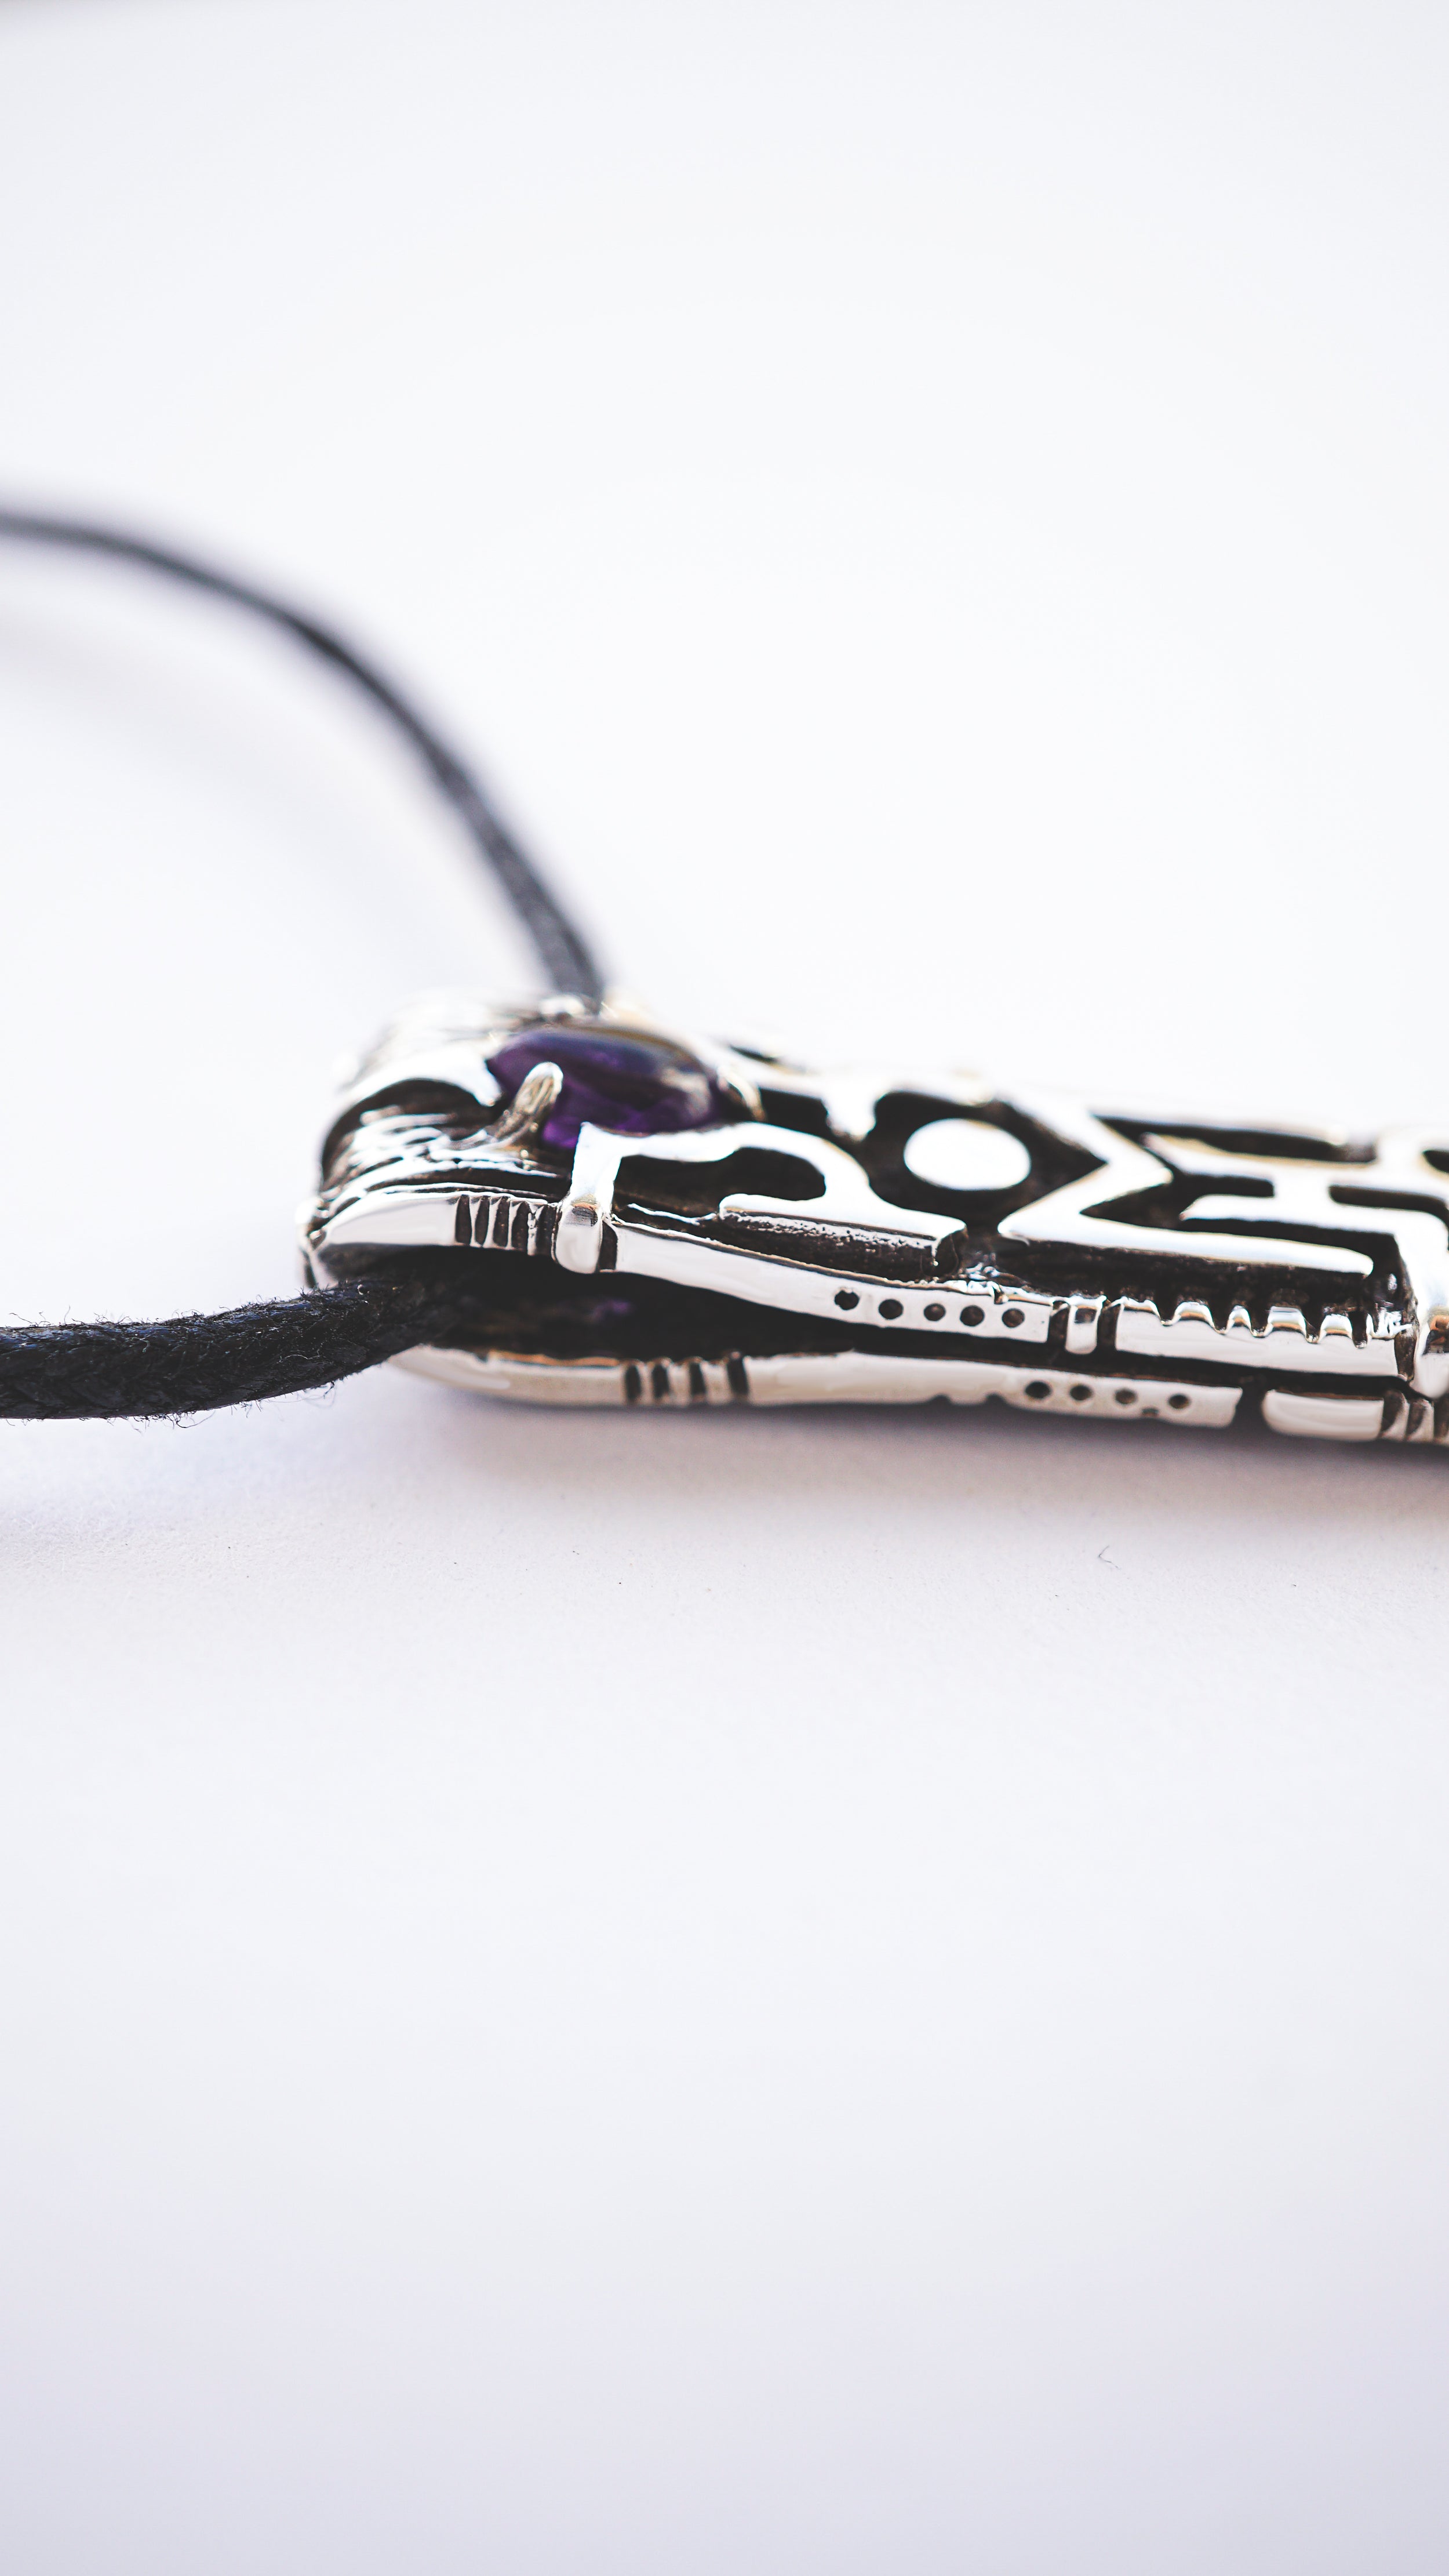 viking rune pendant from sterling silver and amethyst Ehwaz by moonique creation